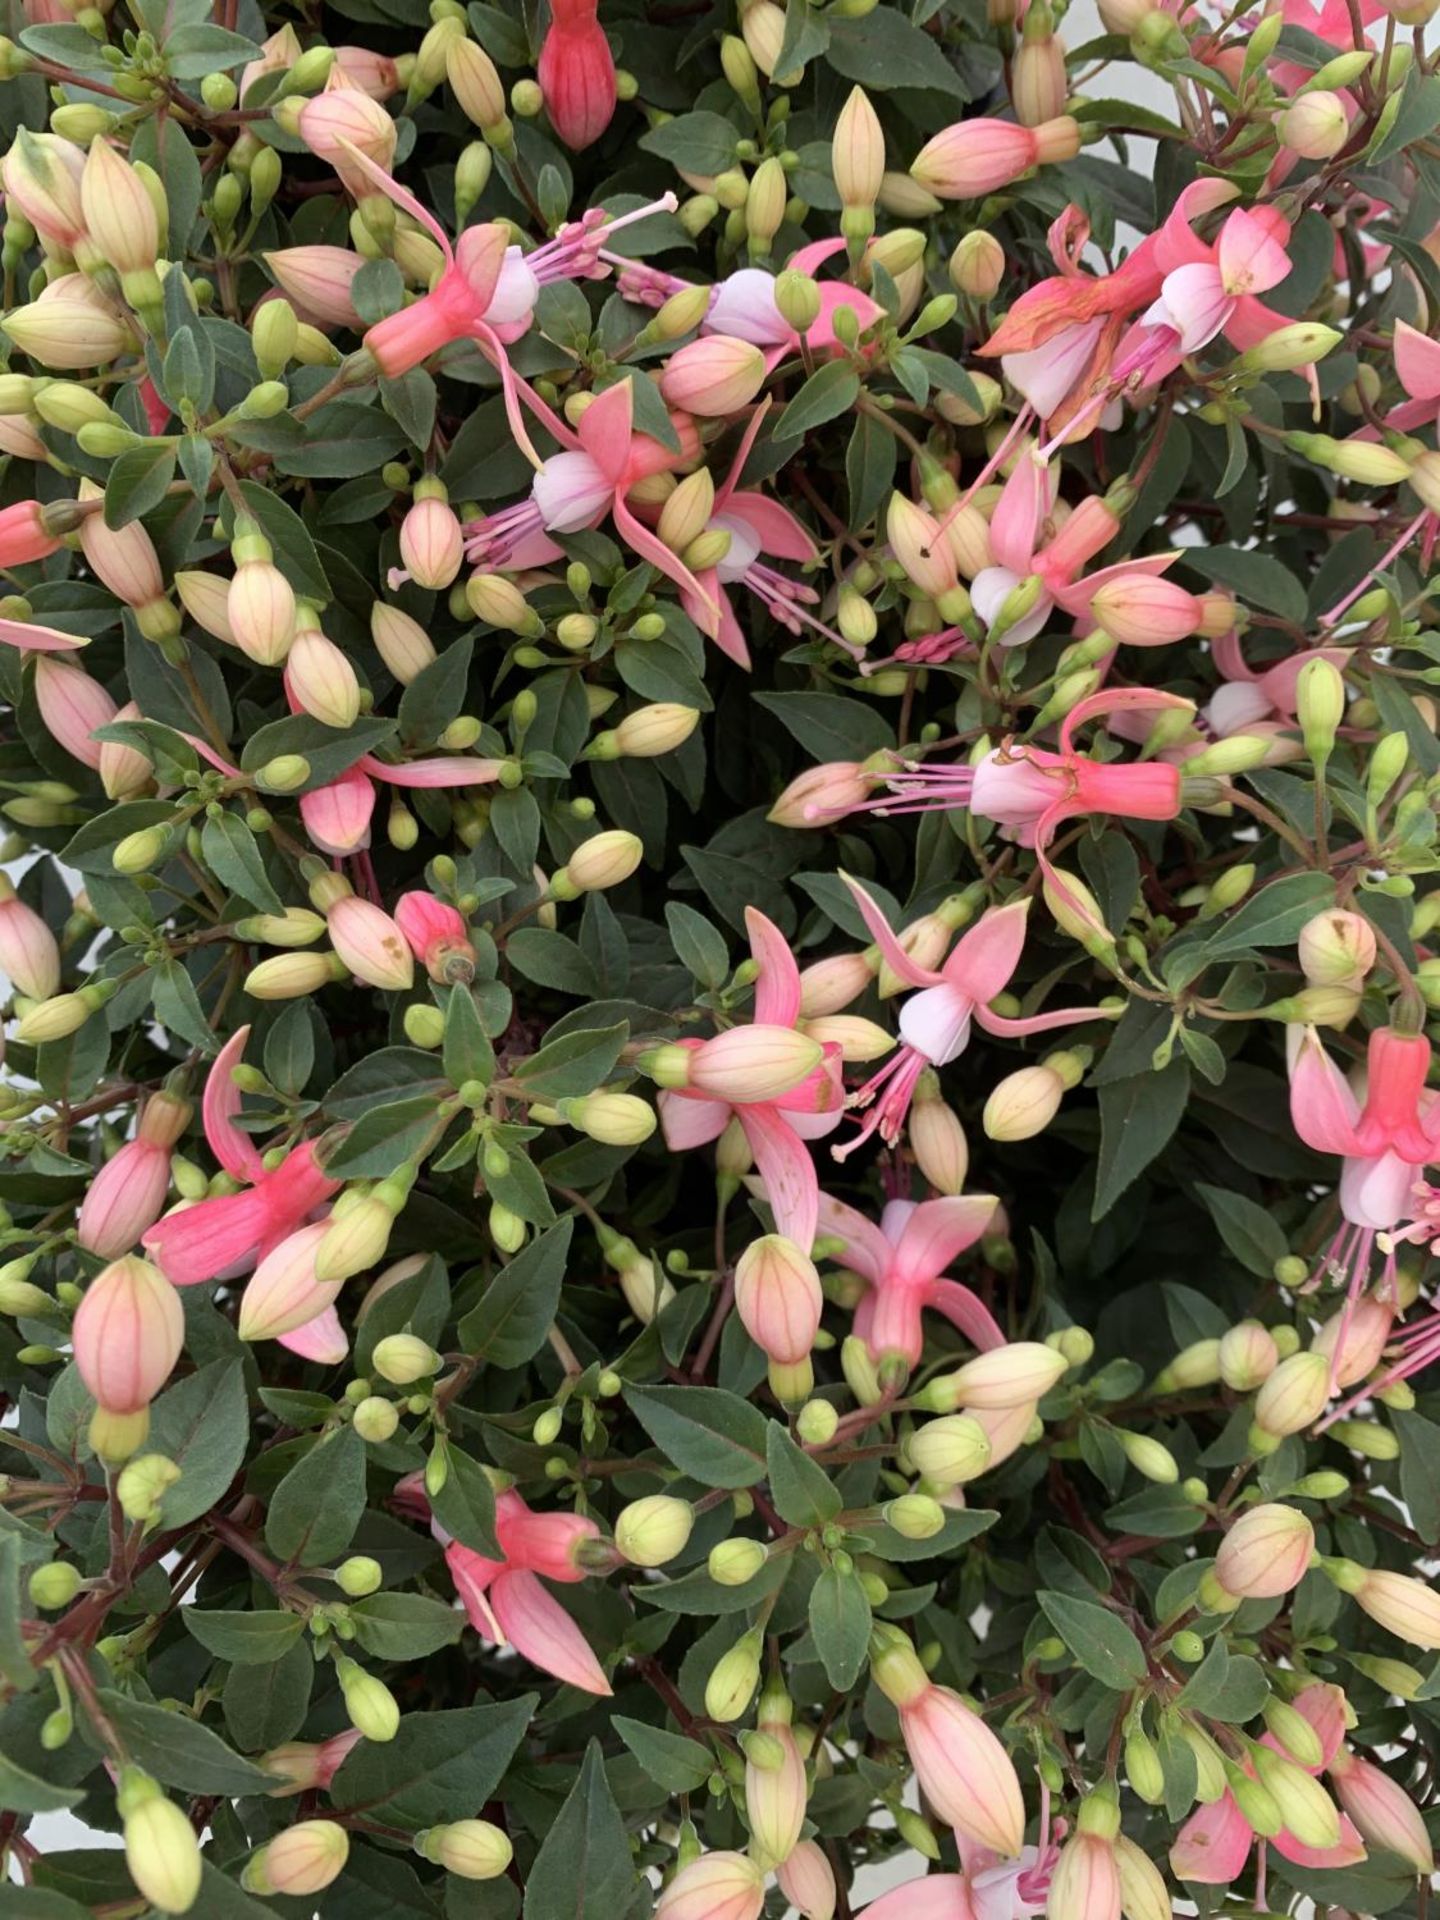 NINE FUCHSIA BELLA PINK IN 20CM POTS 20-30CM TALL TO BE SOLD FOR THE NINE PLUS VAT - Image 6 of 6